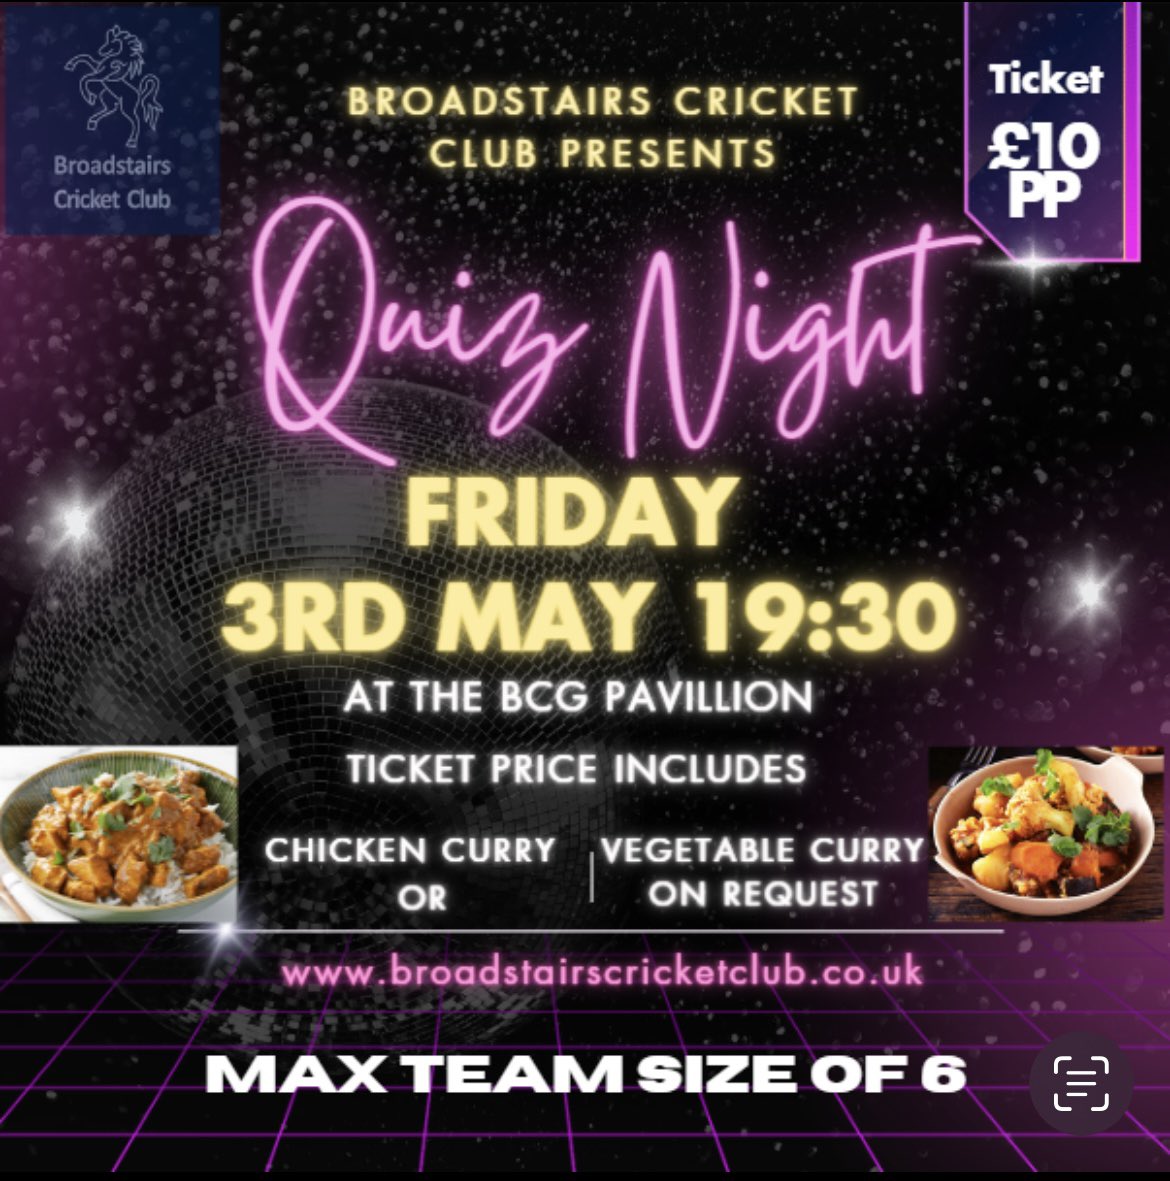 What’s not to like, quiz and curry night!